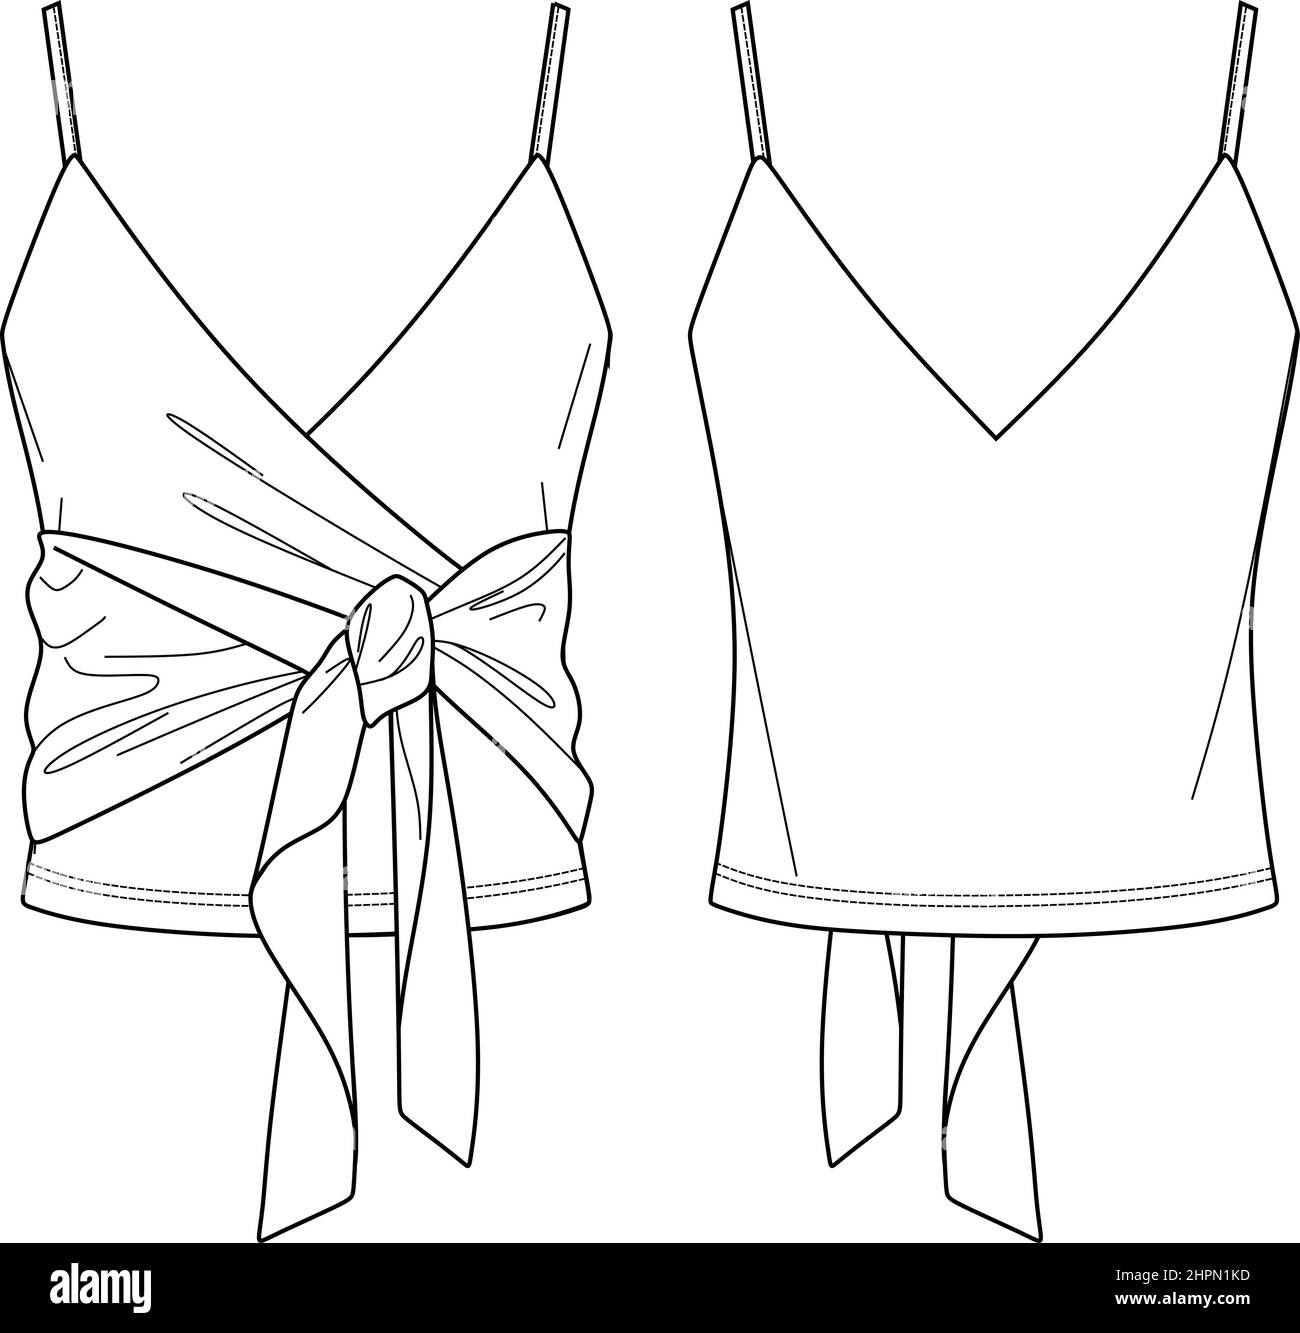 Women camisole with bow detail technical fashion illustration with flattering V-neck, straps, relaxed fit. Flat outwear tank apparel template front, b Stock Vector